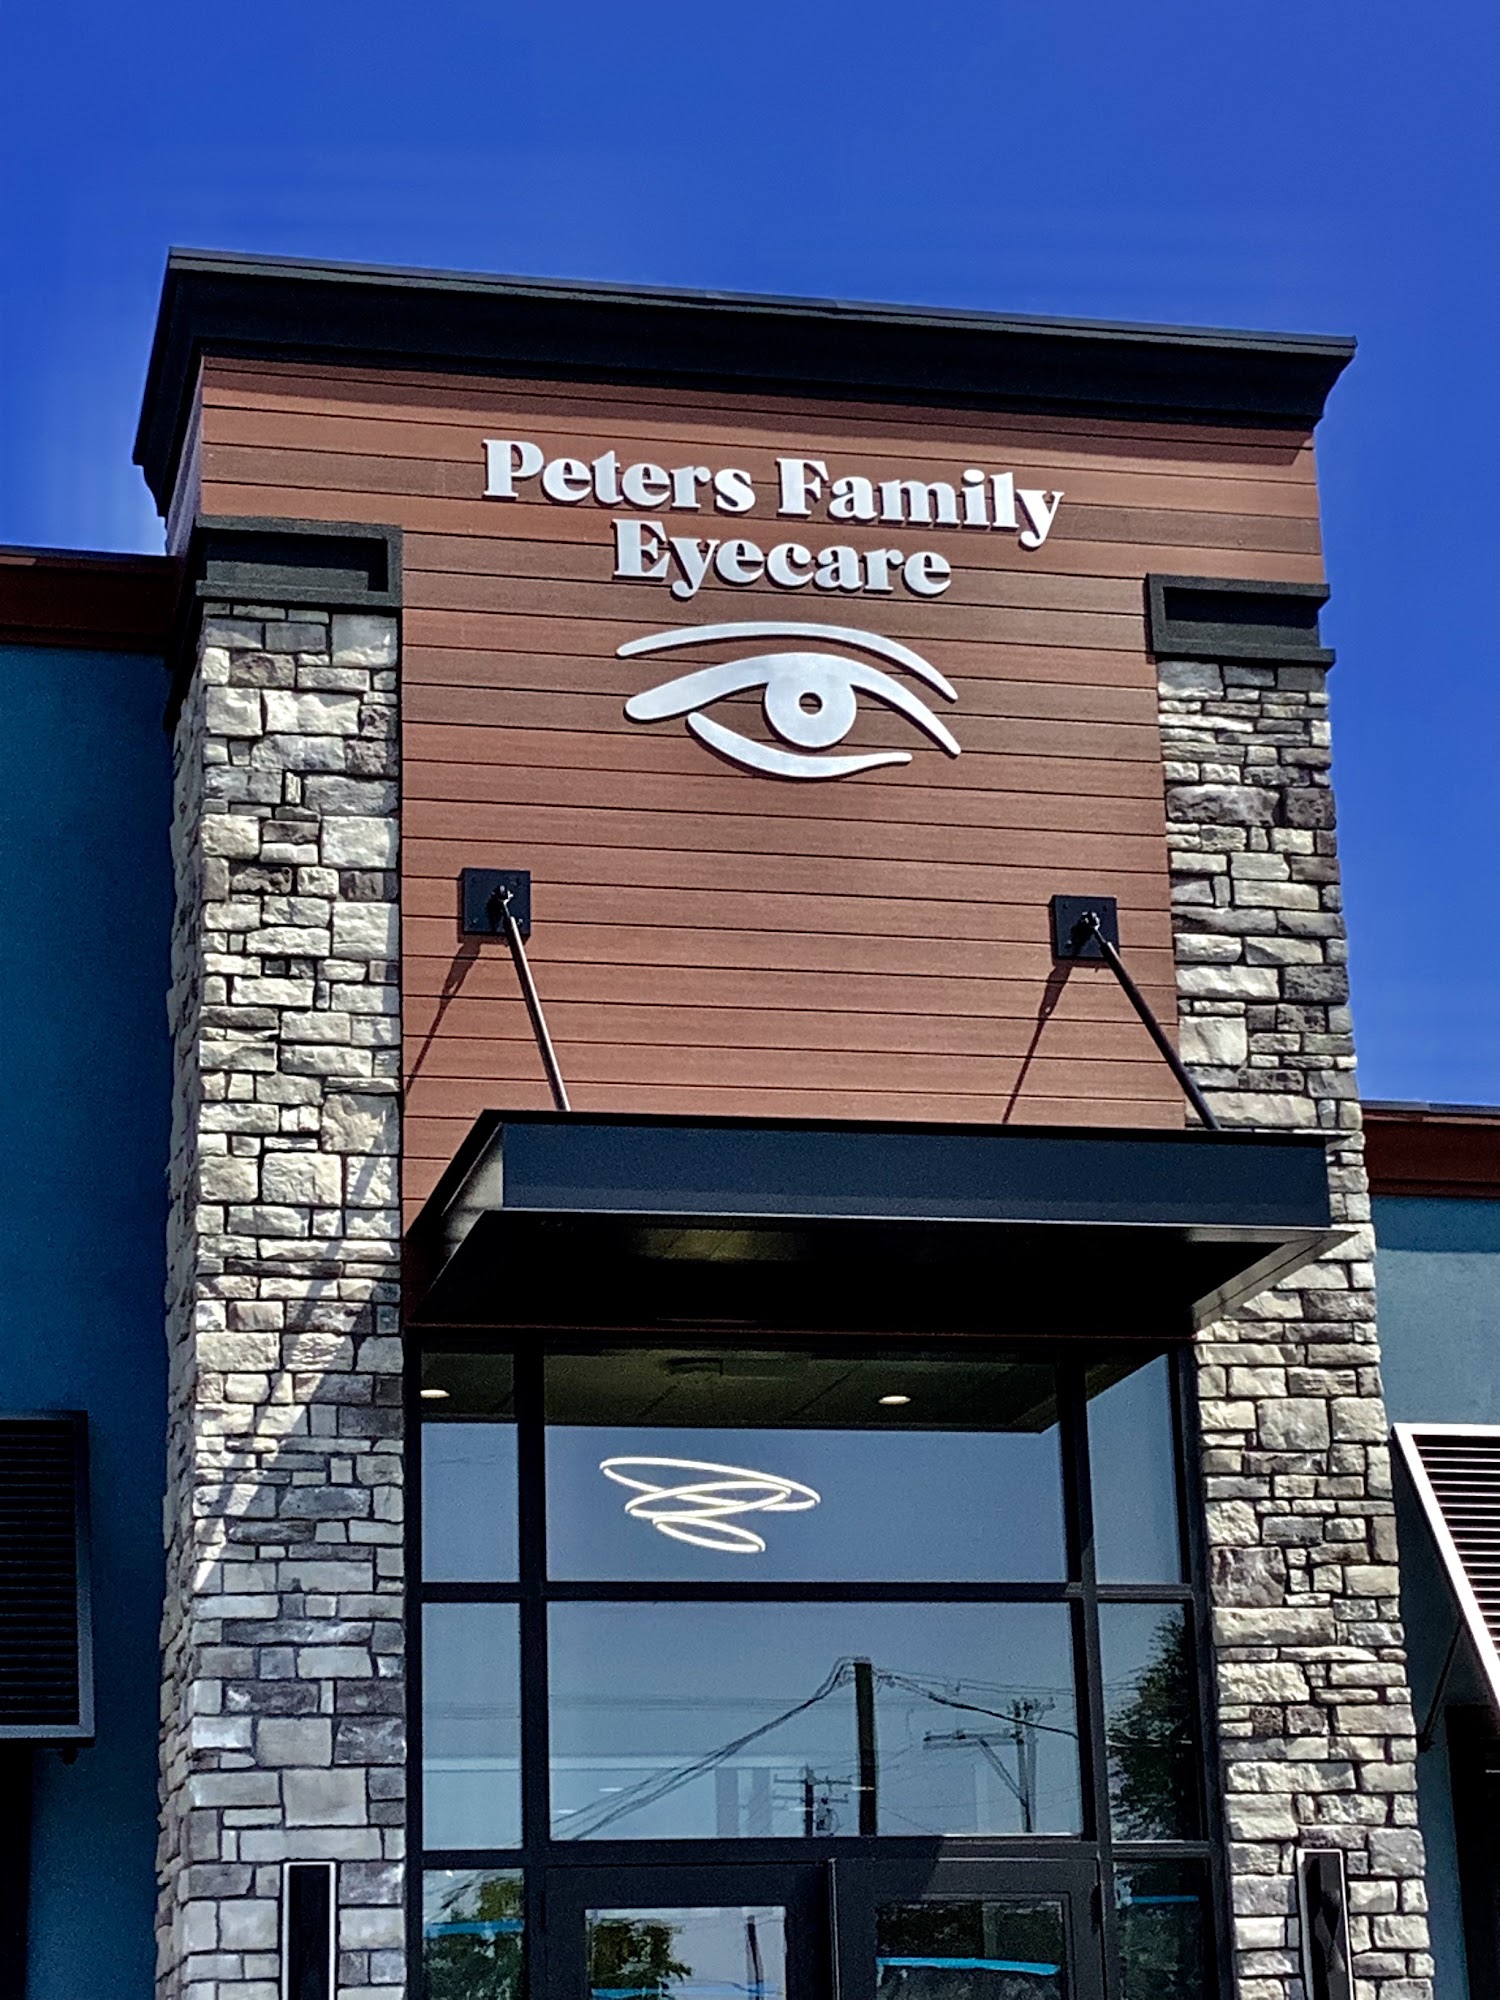 Peters Family Eyecare